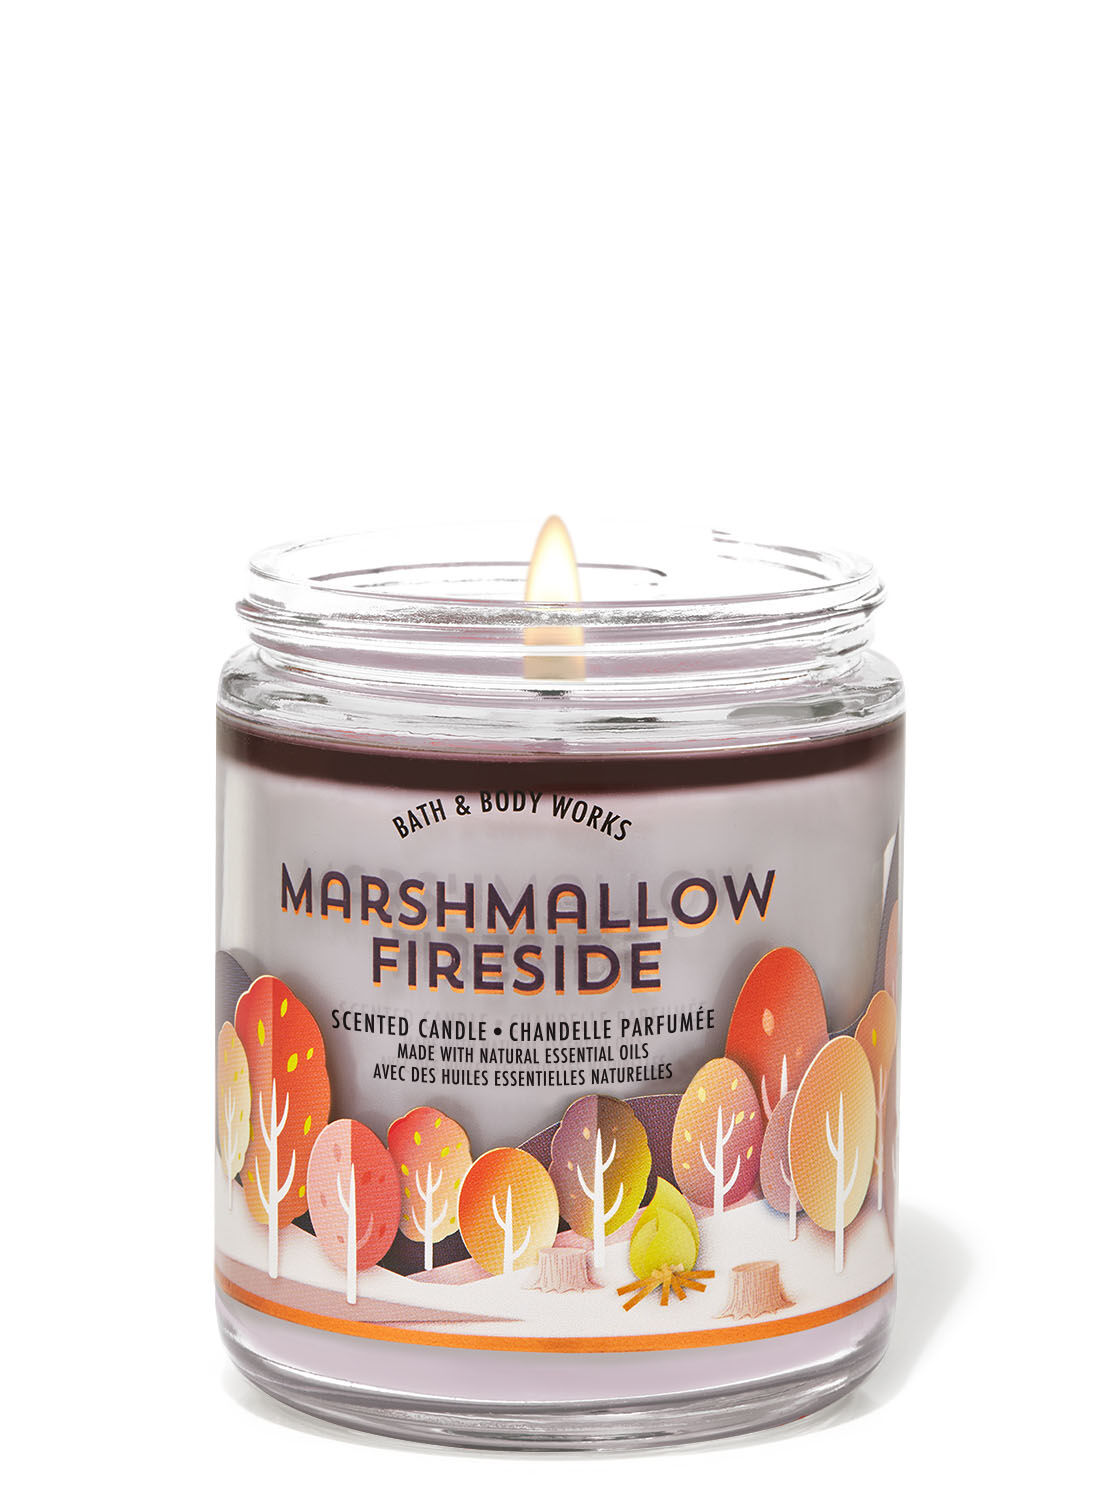 marshmallow fireside candle bath and body